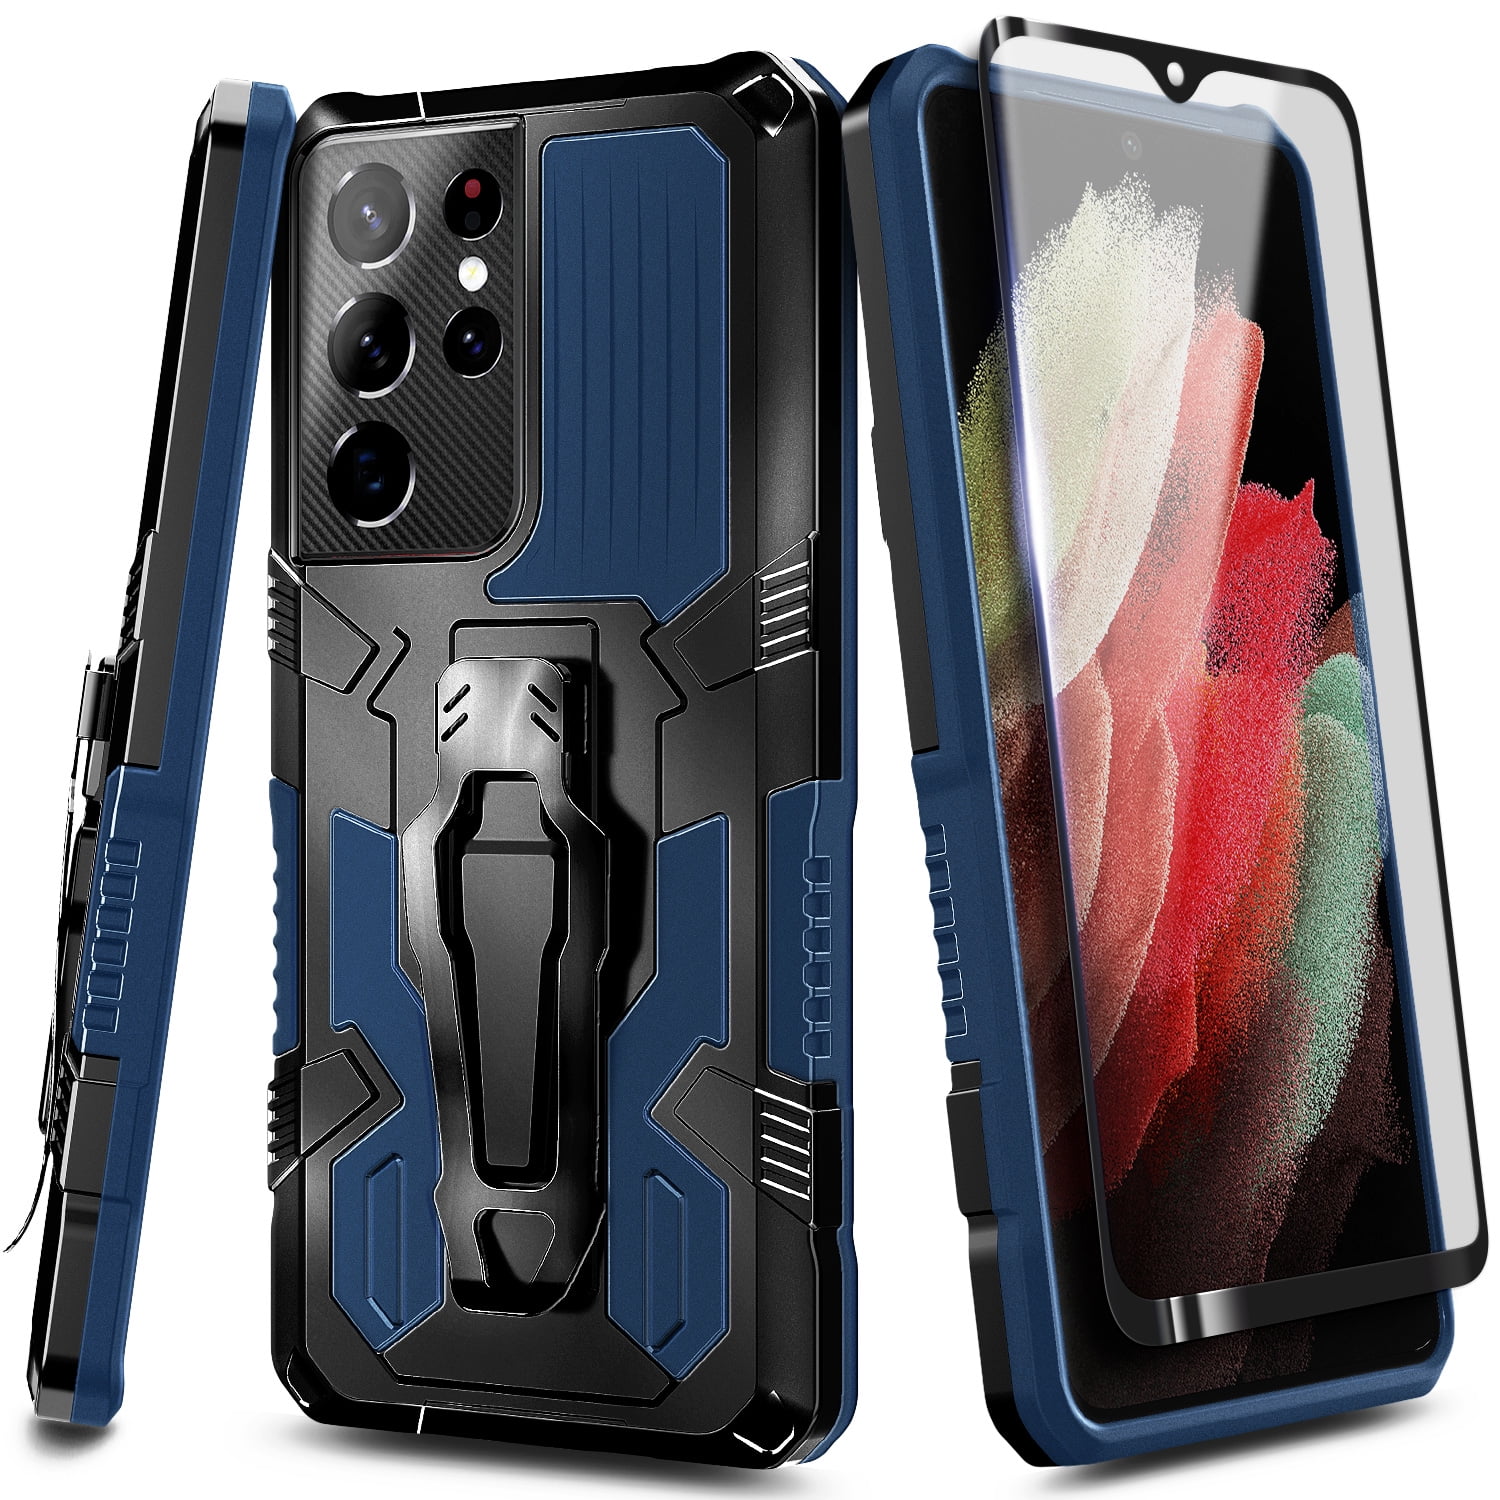 2019 Release, 6.7 inch Full-Body Protective Rugged Matte Bumper Cover with Built-in Screen Protector E-Began Case for Alcatel 3V Shockproof Impact Resist Durable Phone Case -Fantasy Marble Design 